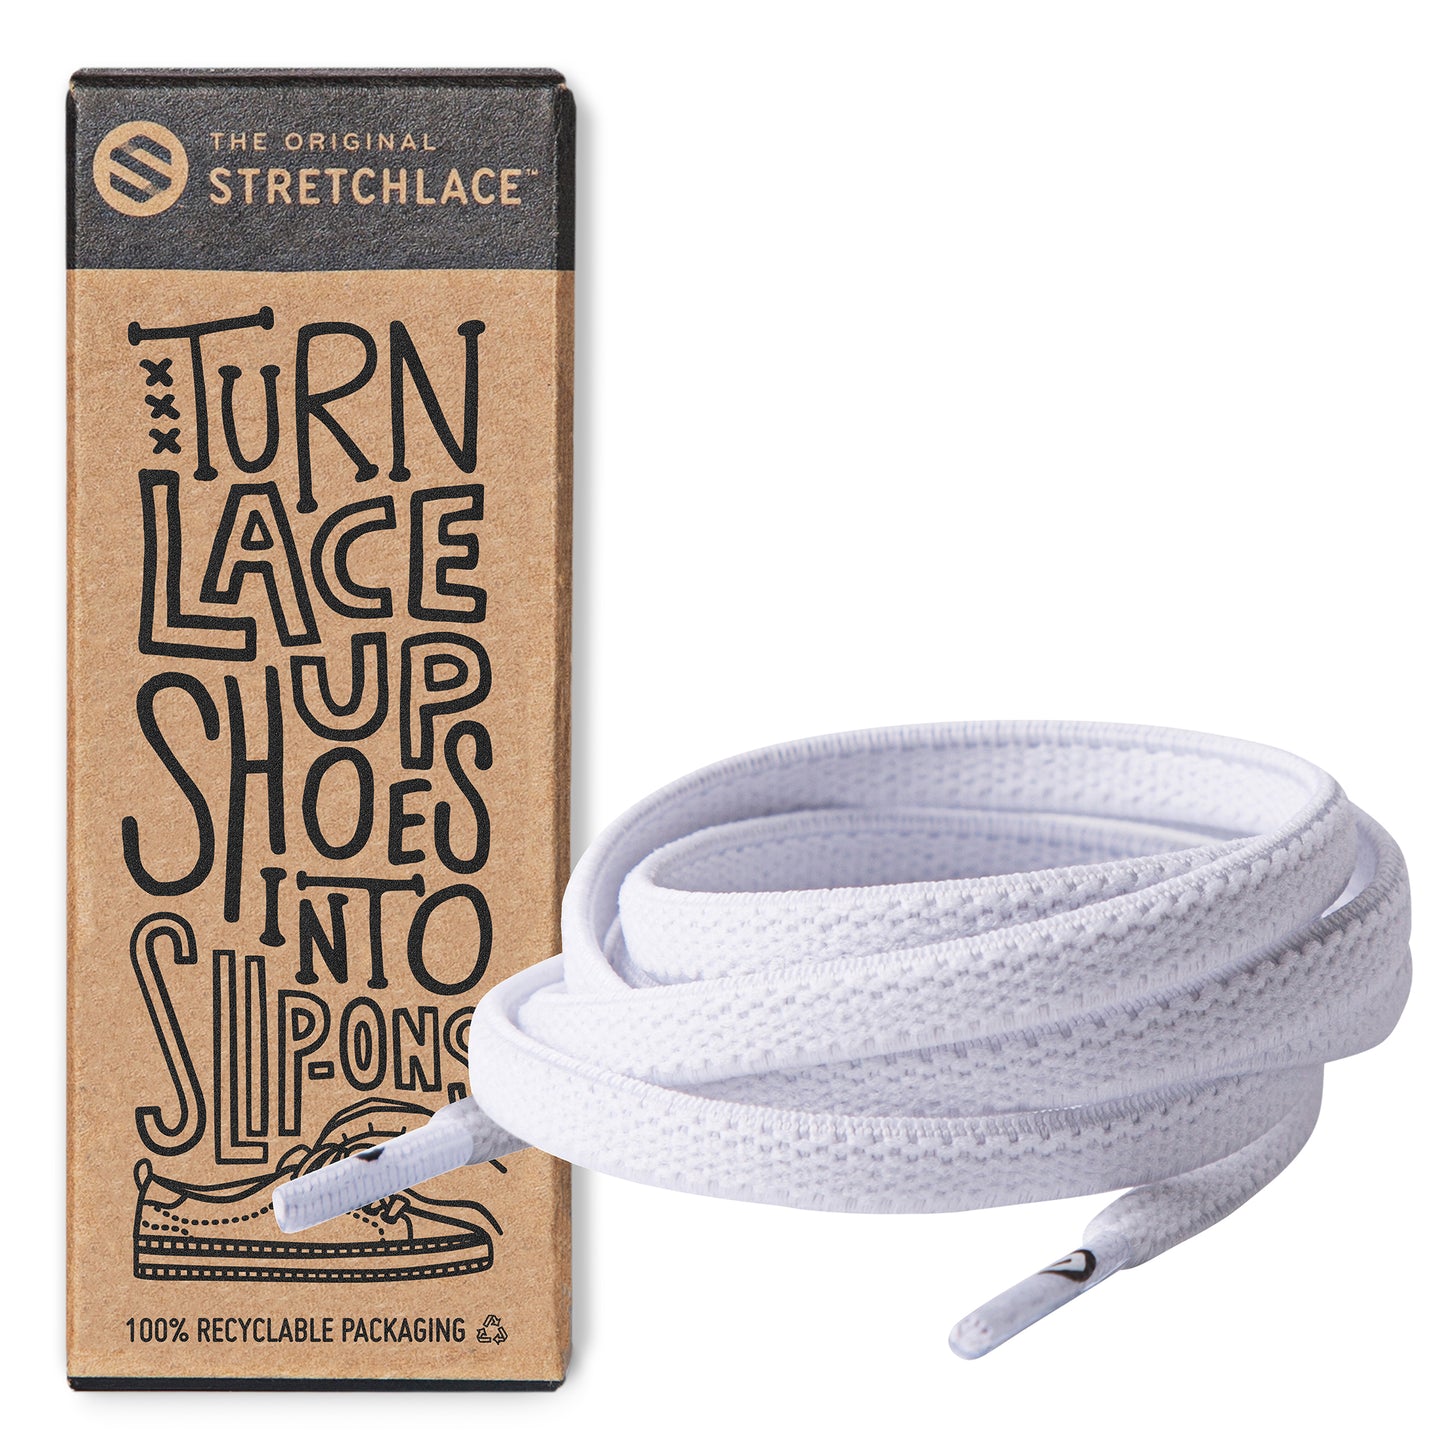 White Flat Elastic Stretch Shoe Laces – The Original Stretchlace